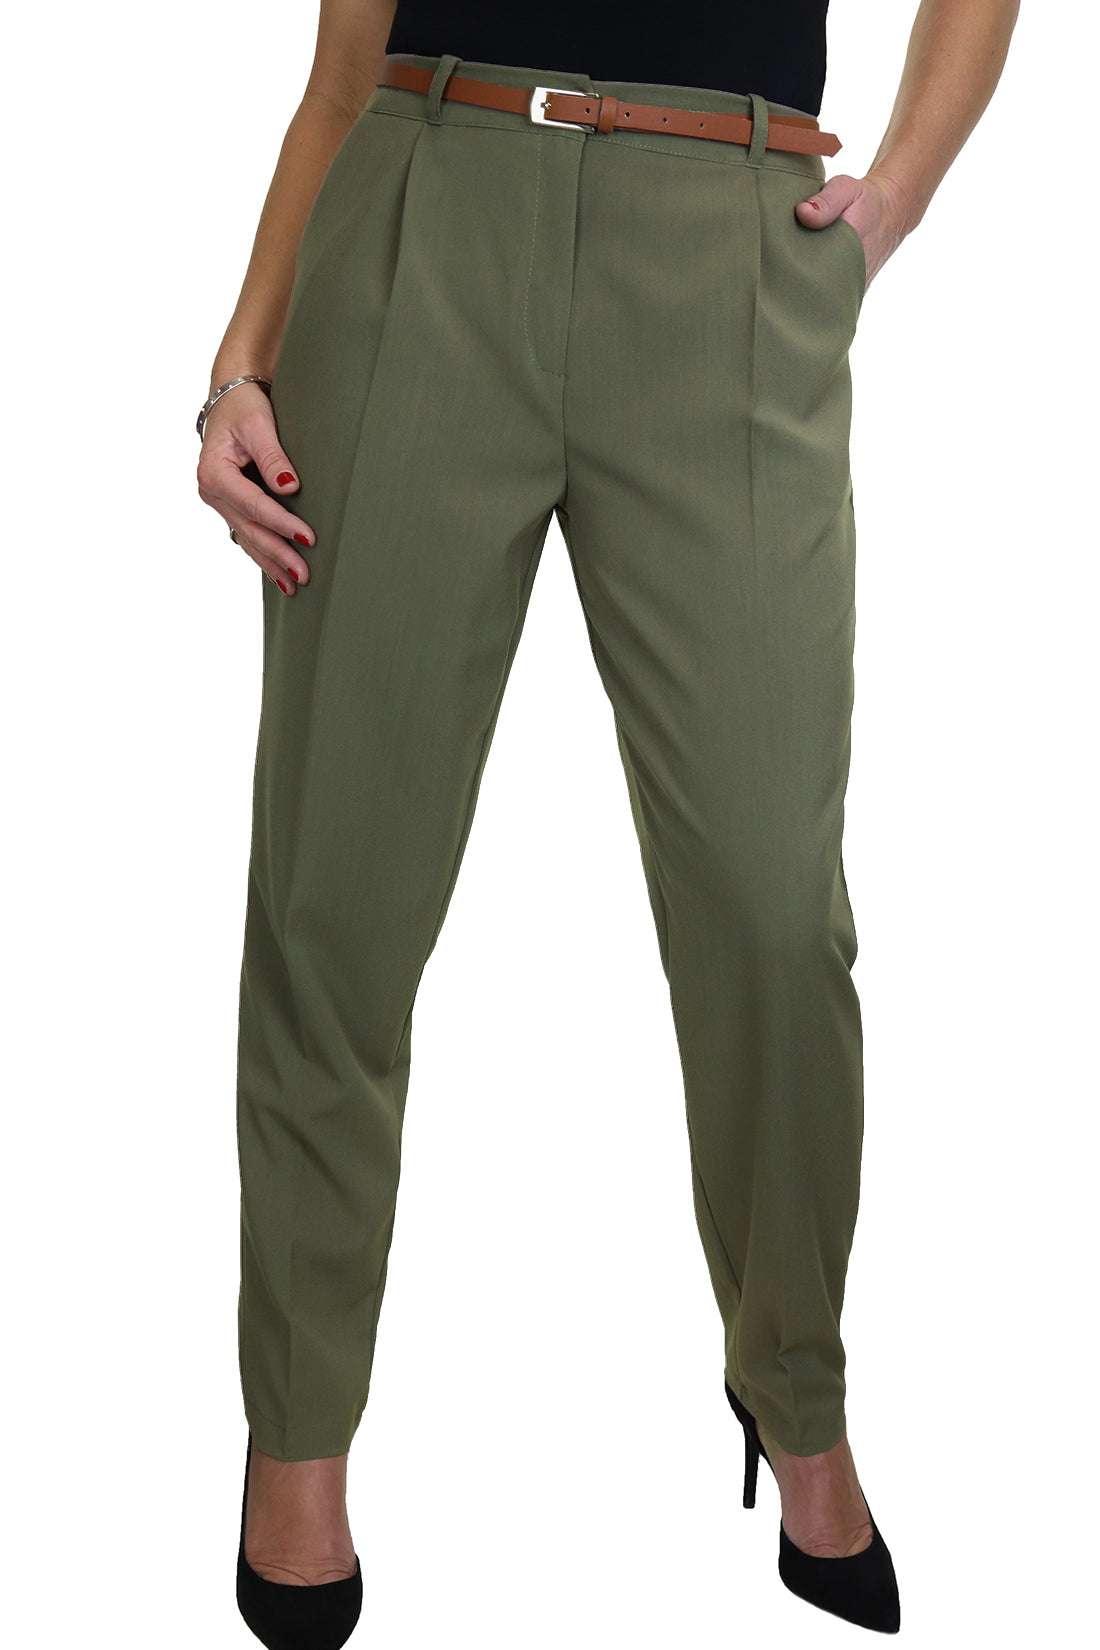 Ladies Smart Tapered Leg Trousers Olive Green